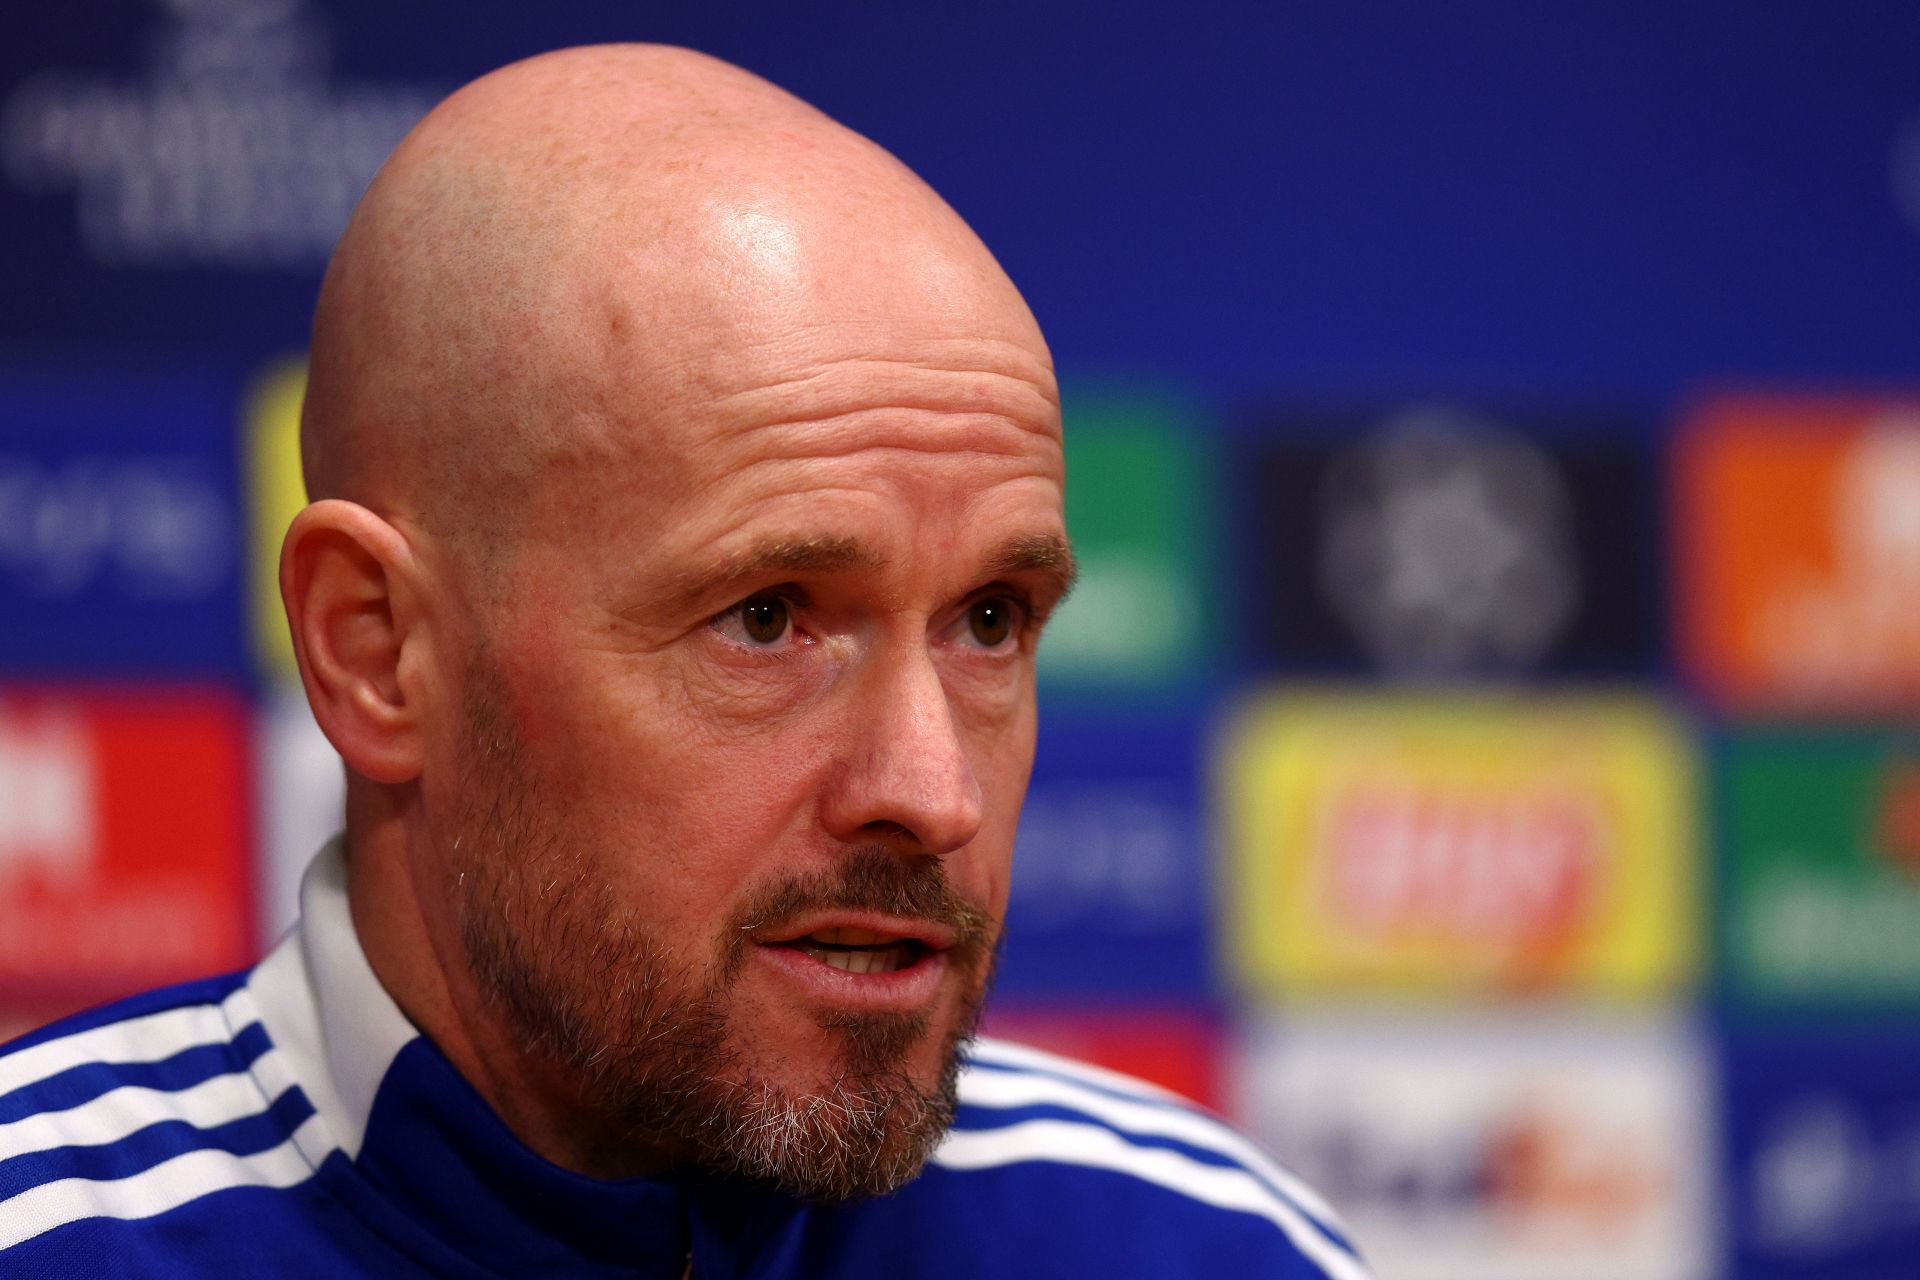 Erik ten Hag is also a likely contender to take over Manchester United